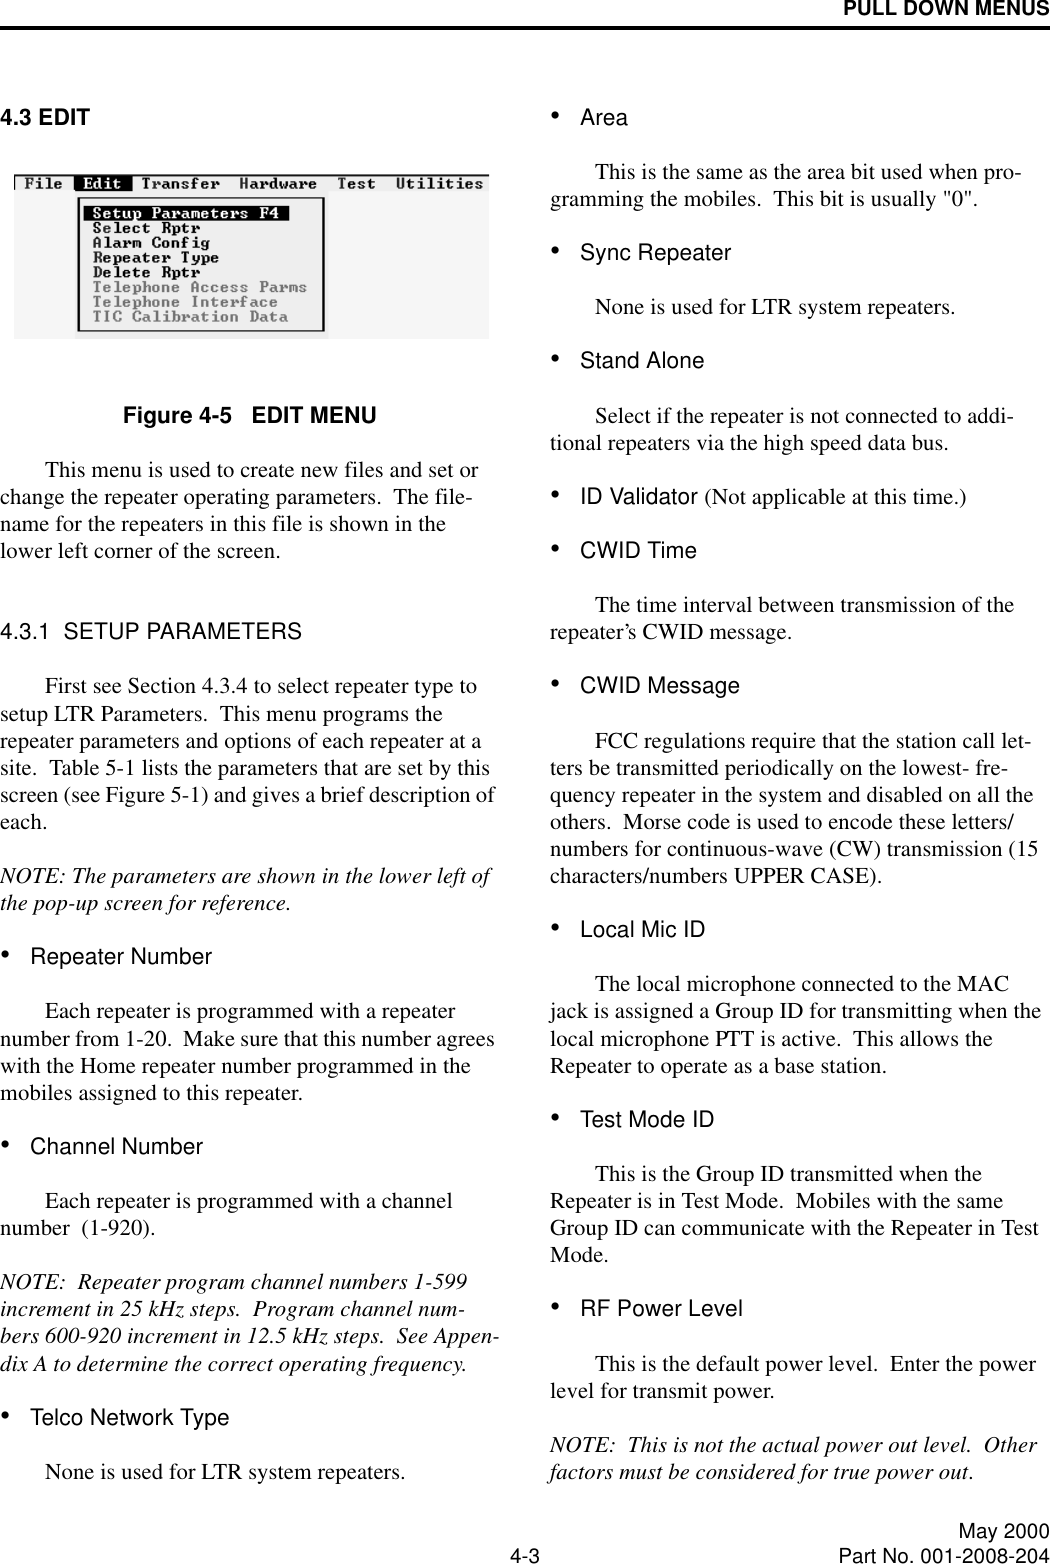 PULL DOWN MENUS4-3 May 2000Part No. 001-2008-2044.3 EDITFigure 4-5   EDIT MENUThis menu is used to create new files and set or change the repeater operating parameters.  The file-name for the repeaters in this file is shown in the lower left corner of the screen.4.3.1  SETUP PARAMETERSFirst see Section 4.3.4 to select repeater type to setup LTR Parameters.  This menu programs the repeater parameters and options of each repeater at a site.  Table 5-1 lists the parameters that are set by this screen (see Figure 5-1) and gives a brief description of each.   NOTE: The parameters are shown in the lower left of the pop-up screen for reference.•Repeater NumberEach repeater is programmed with a repeater number from 1-20.  Make sure that this number agrees with the Home repeater number programmed in the mobiles assigned to this repeater.•Channel NumberEach repeater is programmed with a channel number  (1-920).NOTE:  Repeater program channel numbers 1-599 increment in 25 kHz steps.  Program channel num-bers 600-920 increment in 12.5 kHz steps.  See Appen-dix A to determine the correct operating frequency.•Telco Network TypeNone is used for LTR system repeaters.•AreaThis is the same as the area bit used when pro-gramming the mobiles.  This bit is usually &quot;0&quot;.•Sync RepeaterNone is used for LTR system repeaters.•Stand AloneSelect if the repeater is not connected to addi-tional repeaters via the high speed data bus.•ID Validator (Not applicable at this time.)•CWID TimeThe time interval between transmission of the repeater’s CWID message.•CWID MessageFCC regulations require that the station call let-ters be transmitted periodically on the lowest- fre-quency repeater in the system and disabled on all the others.  Morse code is used to encode these letters/numbers for continuous-wave (CW) transmission (15 characters/numbers UPPER CASE).•Local Mic IDThe local microphone connected to the MAC jack is assigned a Group ID for transmitting when the local microphone PTT is active.  This allows the Repeater to operate as a base station.•Test Mode IDThis is the Group ID transmitted when the Repeater is in Test Mode.  Mobiles with the same Group ID can communicate with the Repeater in Test Mode.•RF Power LevelThis is the default power level.  Enter the power level for transmit power.NOTE:  This is not the actual power out level.  Other factors must be considered for true power out.